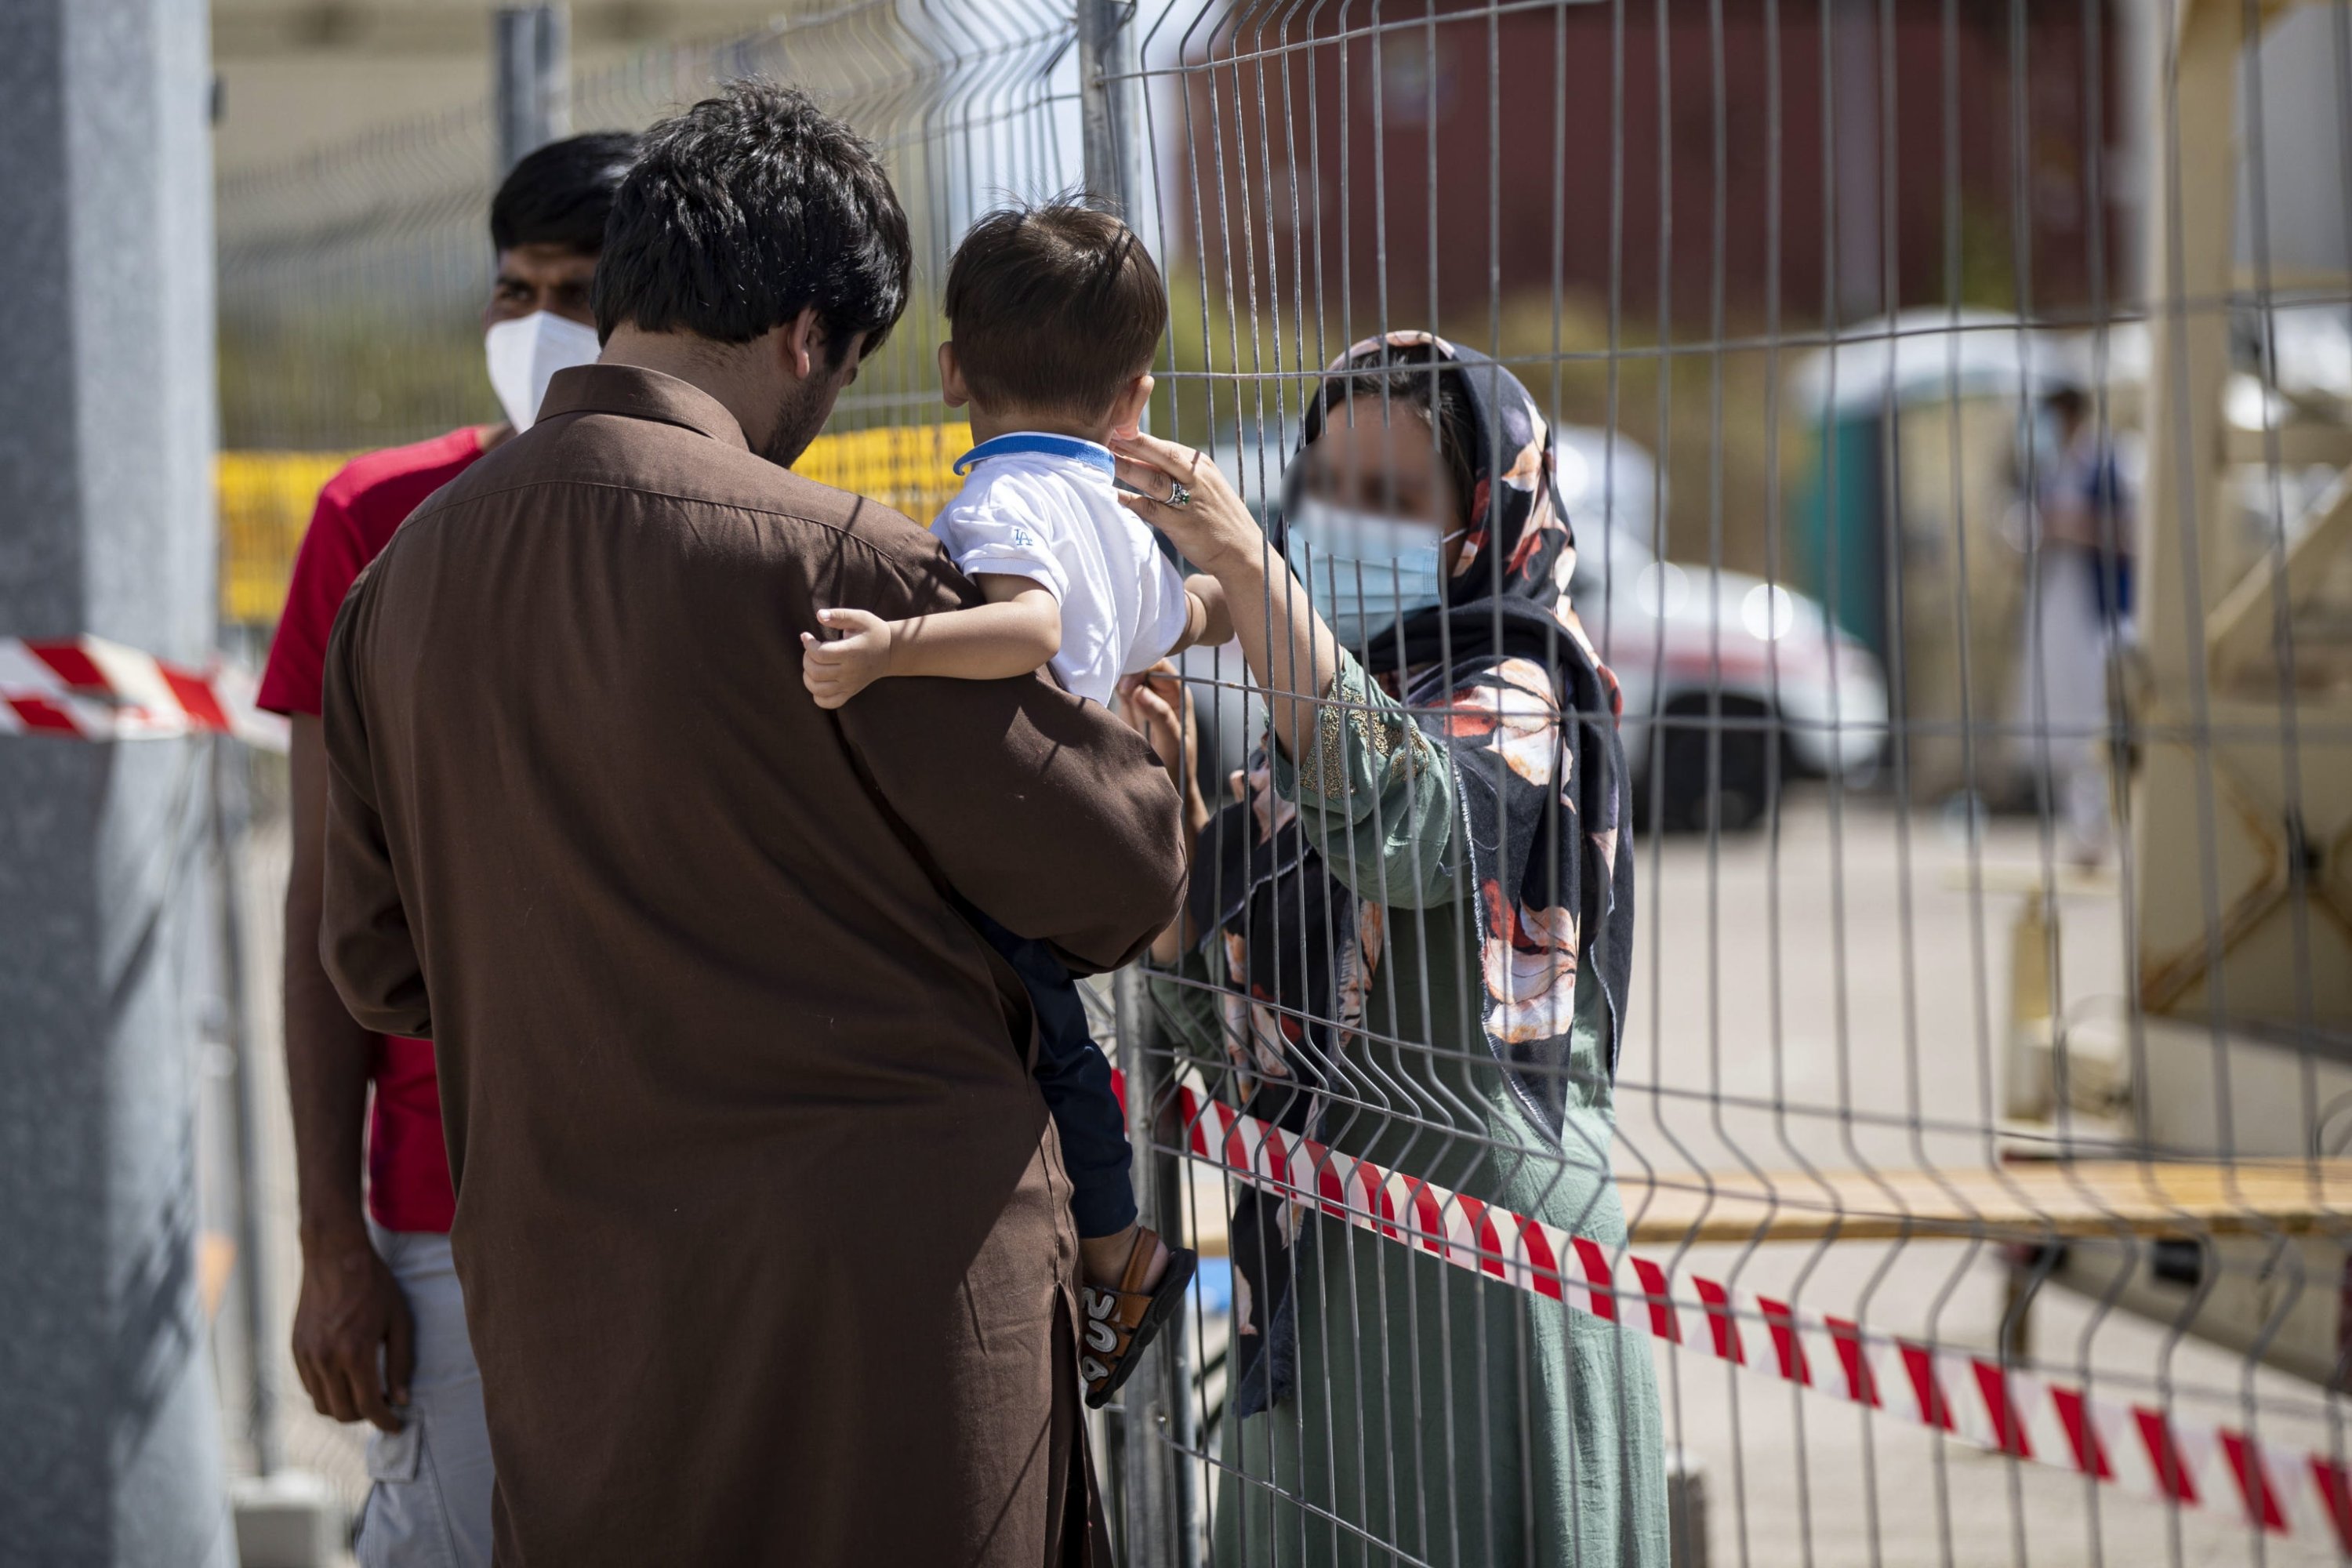 The reception center for Afghan refugees organized by the Italian Red Cross in Avezzano, Italy, Sept 1, 2021. (EPA Photo)